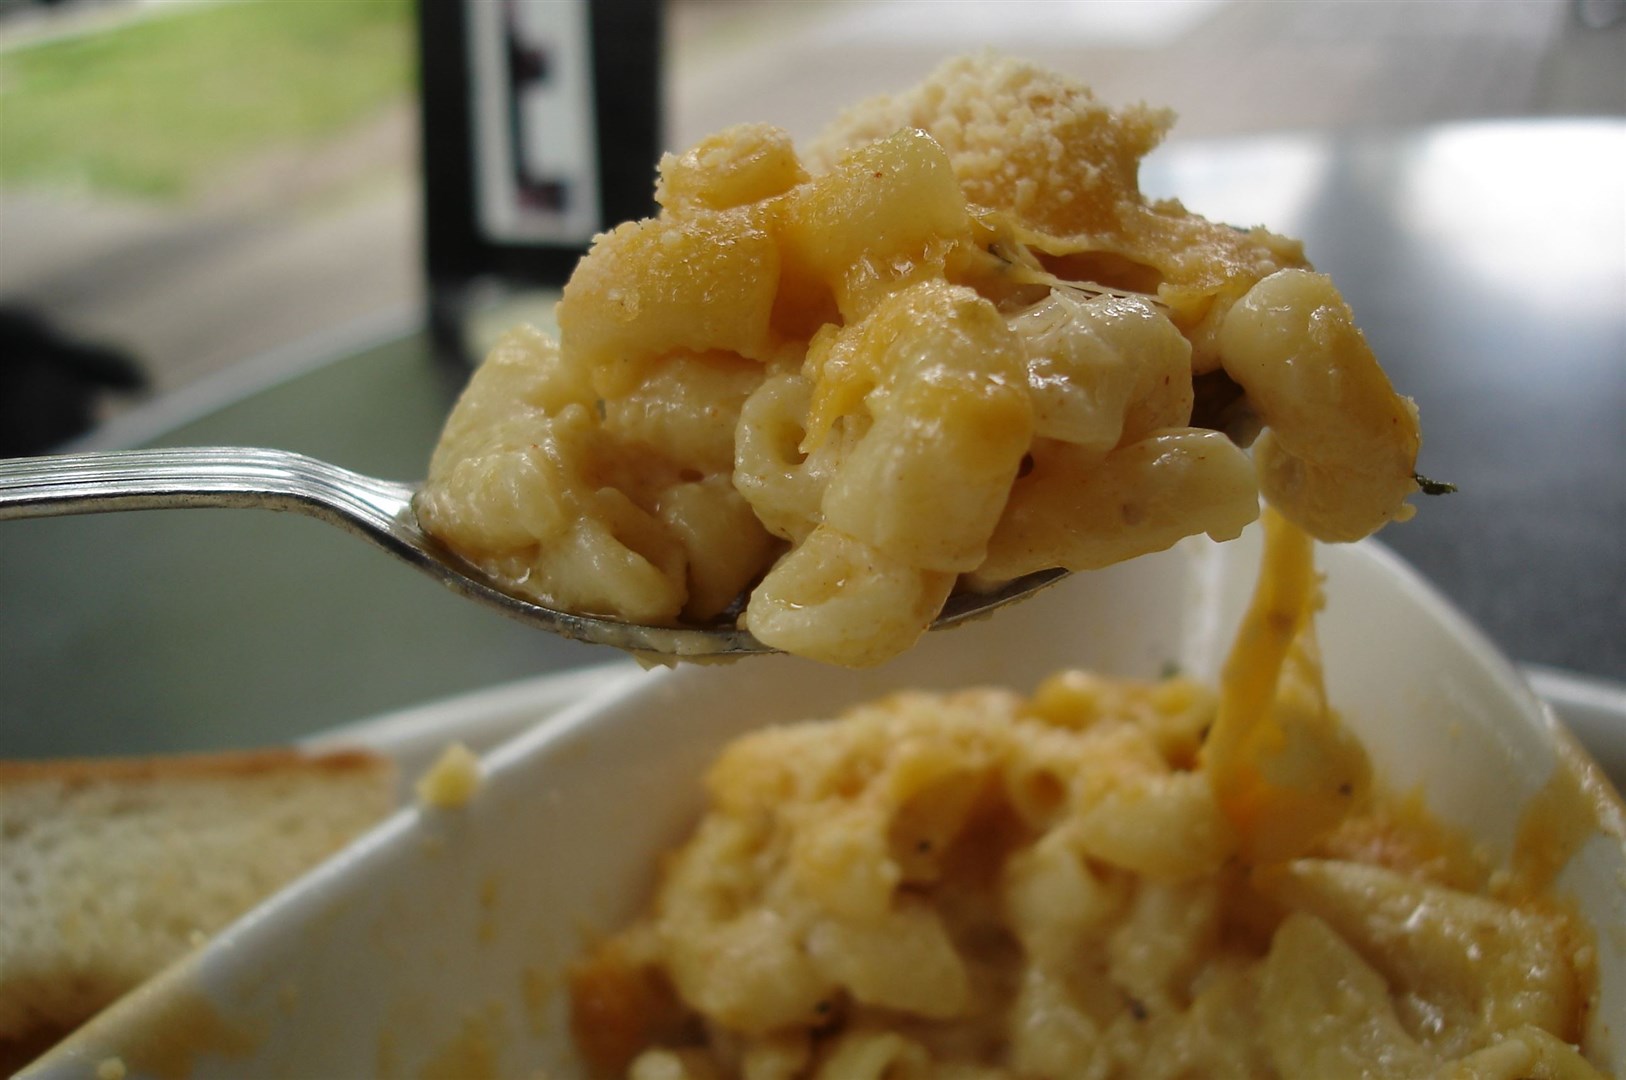 Macaroni and cheese is a comforting eat for many. Picture: Wikimedia Commons